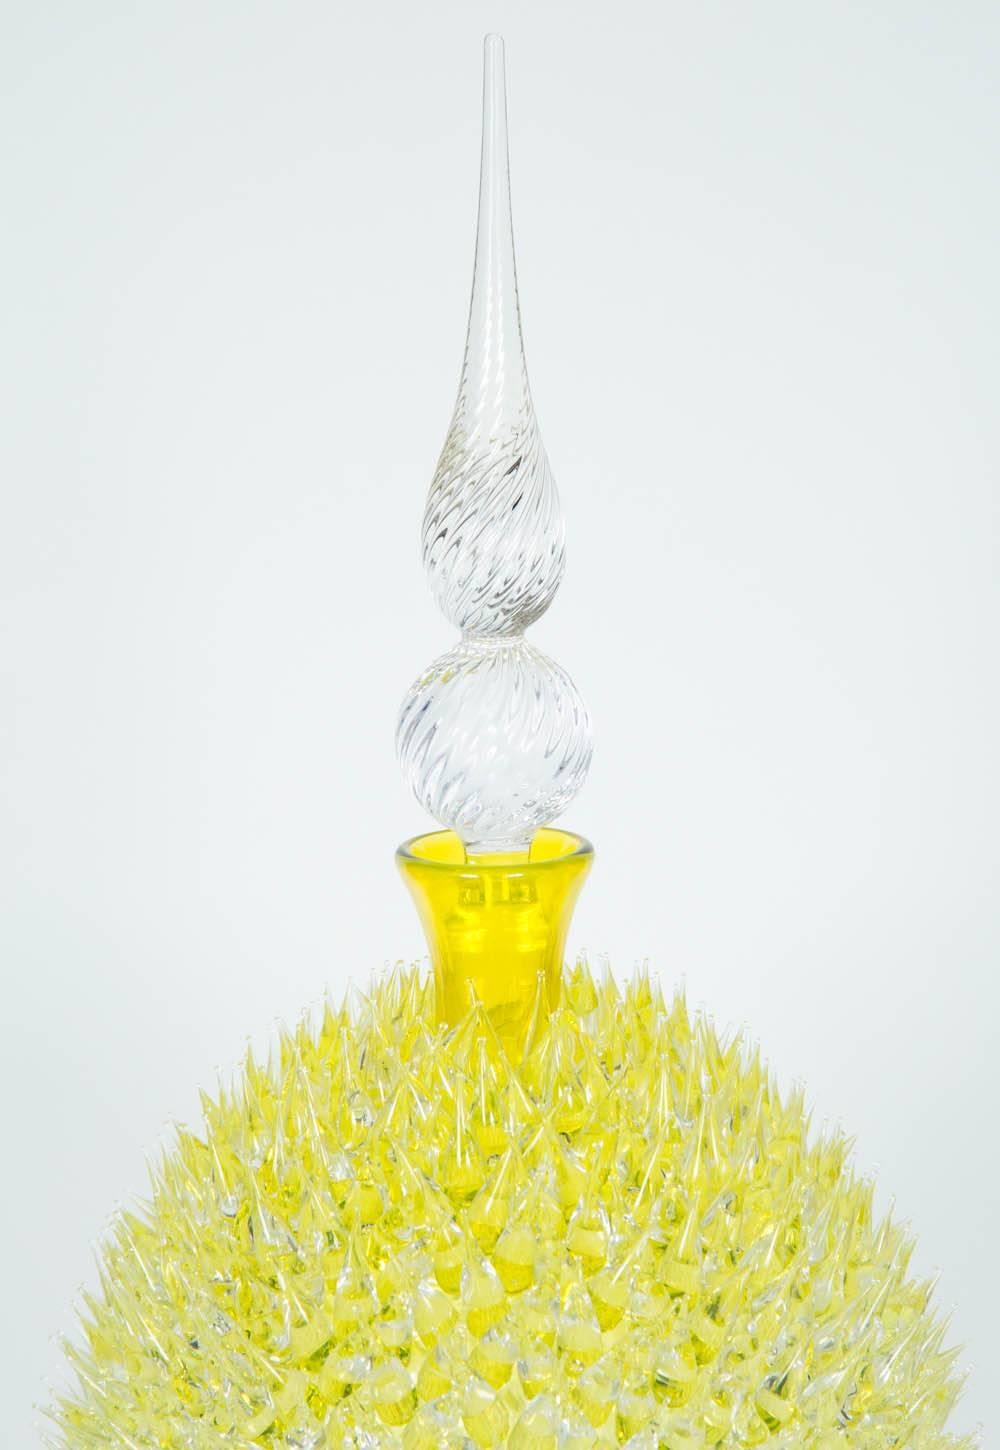 Acanthus Veronese in Yellow, is a unique art glass jar by British glass artist James Lethbridge. Blown glass with the outer layer covered in flameworked decoration and adornment. With removable decorative glass stopper.

Initially following a career